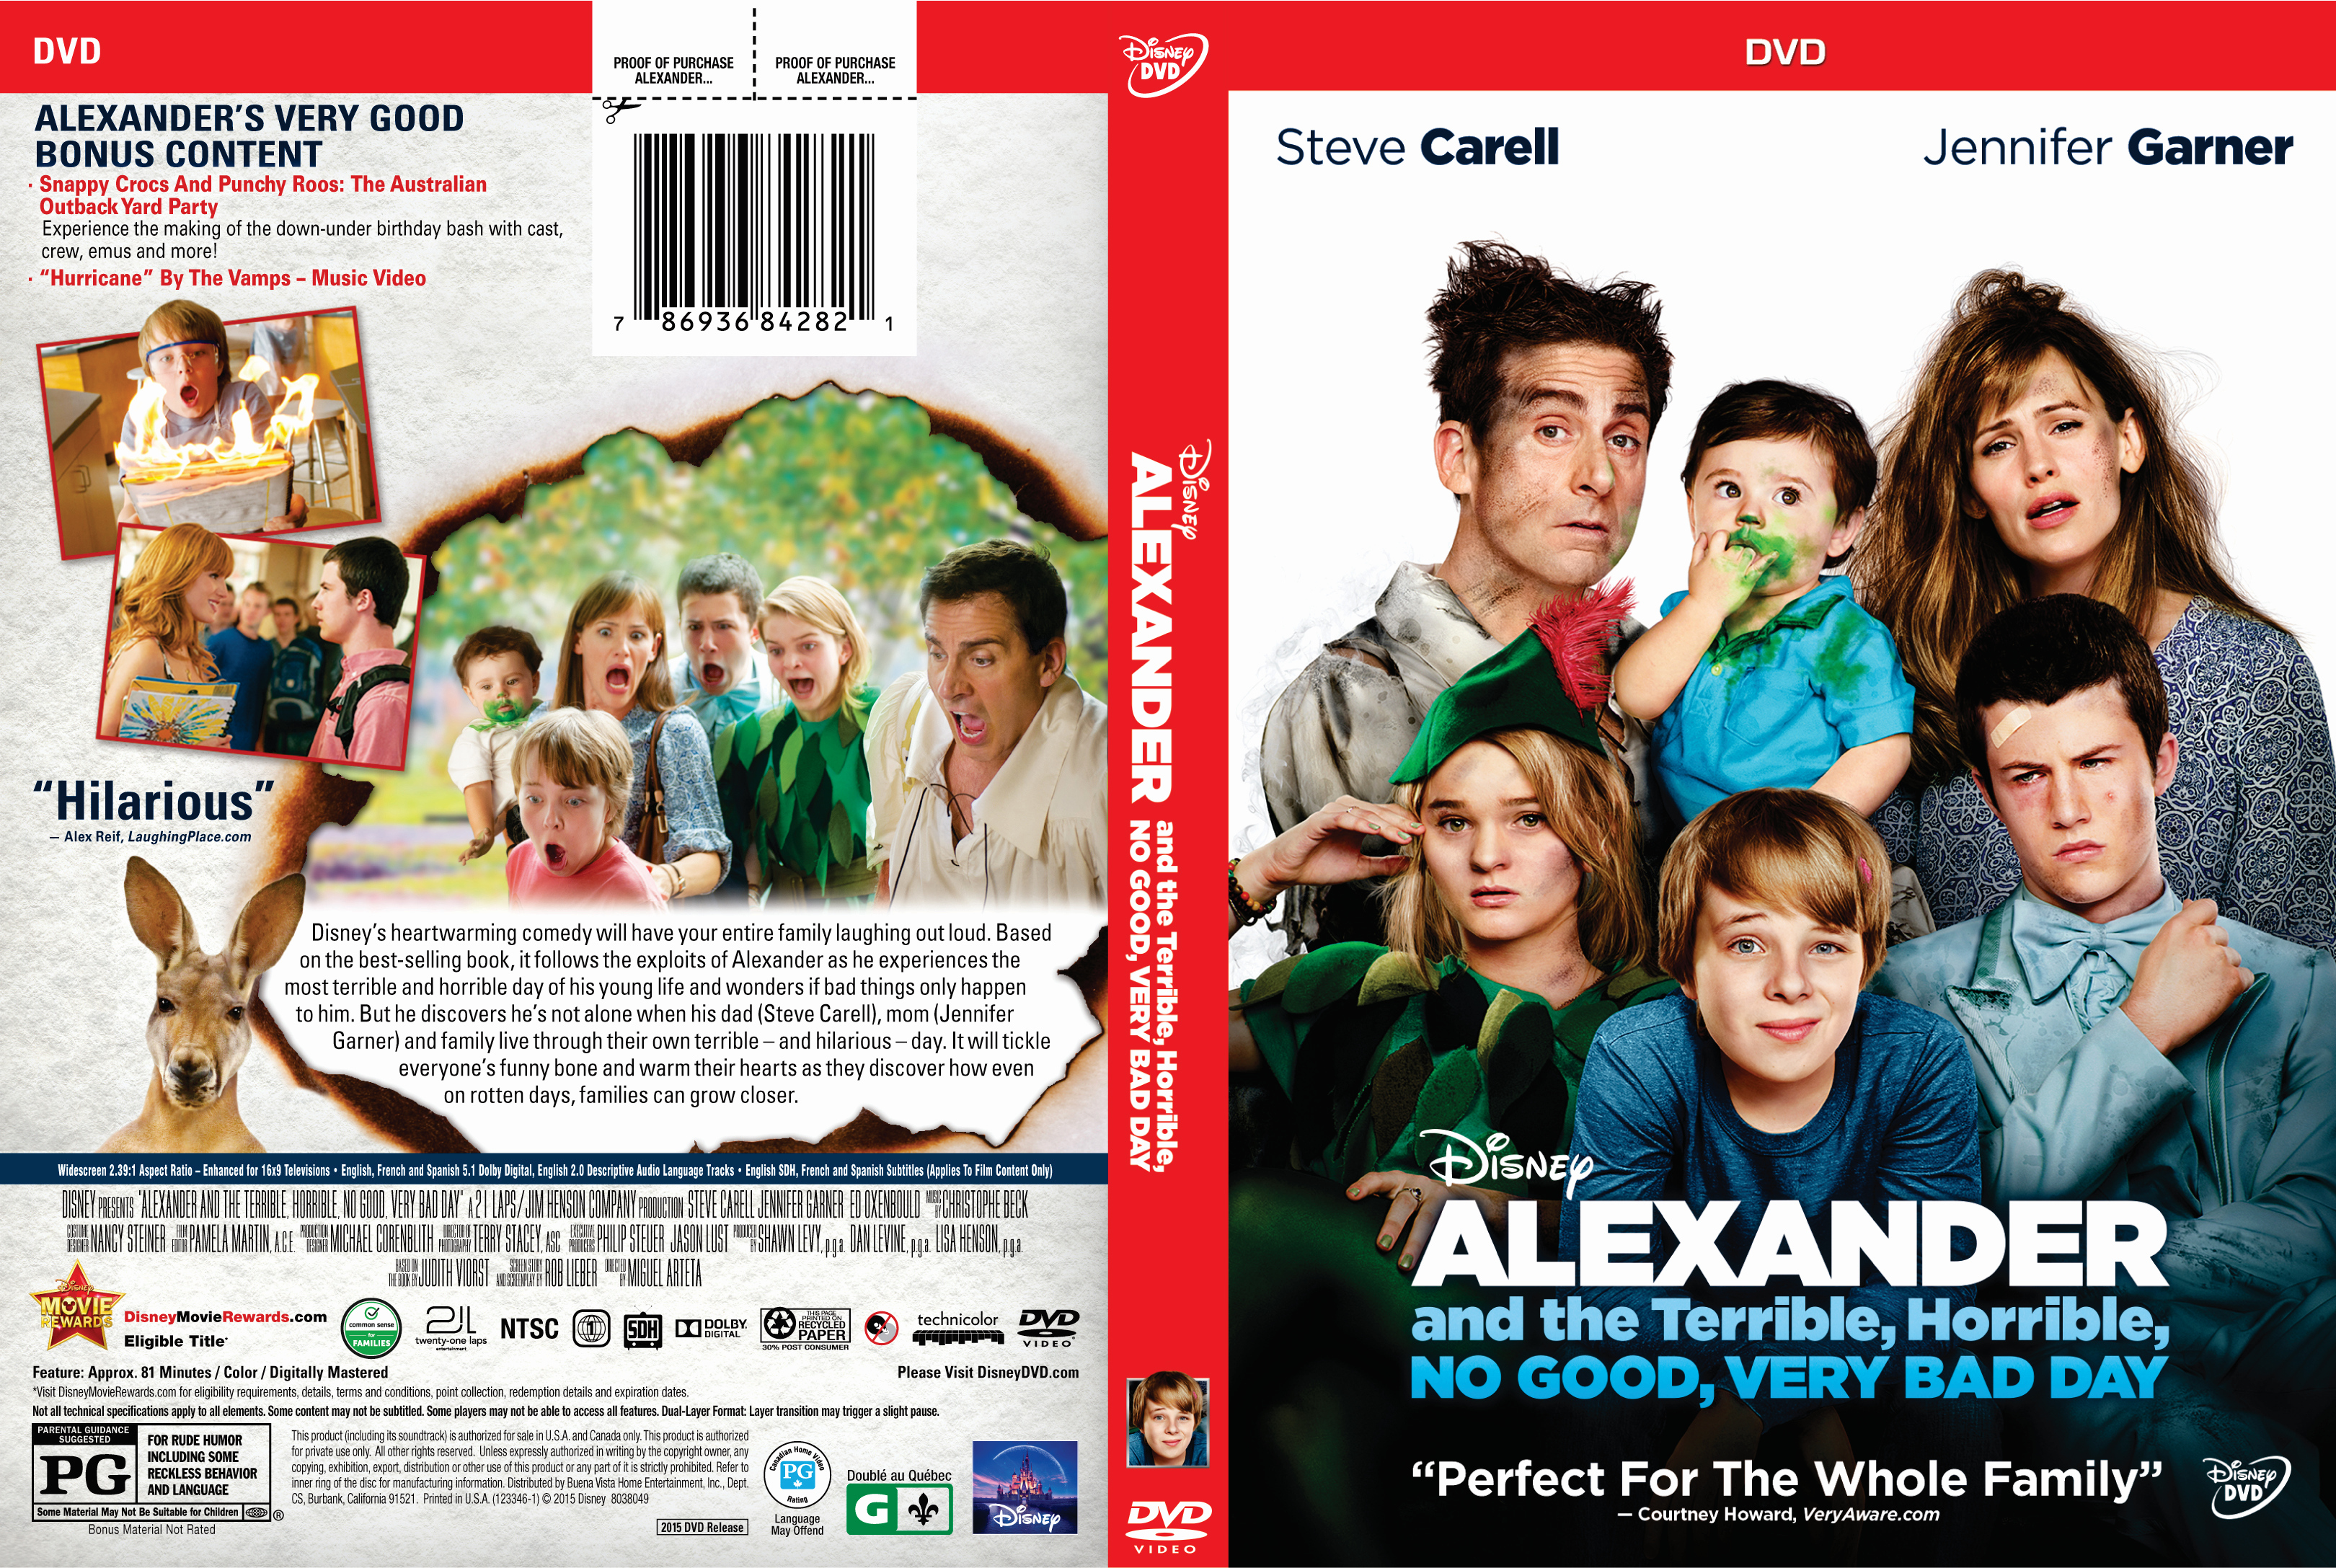 Jaquette DVD Alexander and the Terrible, Horrible, No Good, Very Bad Day Zone 1